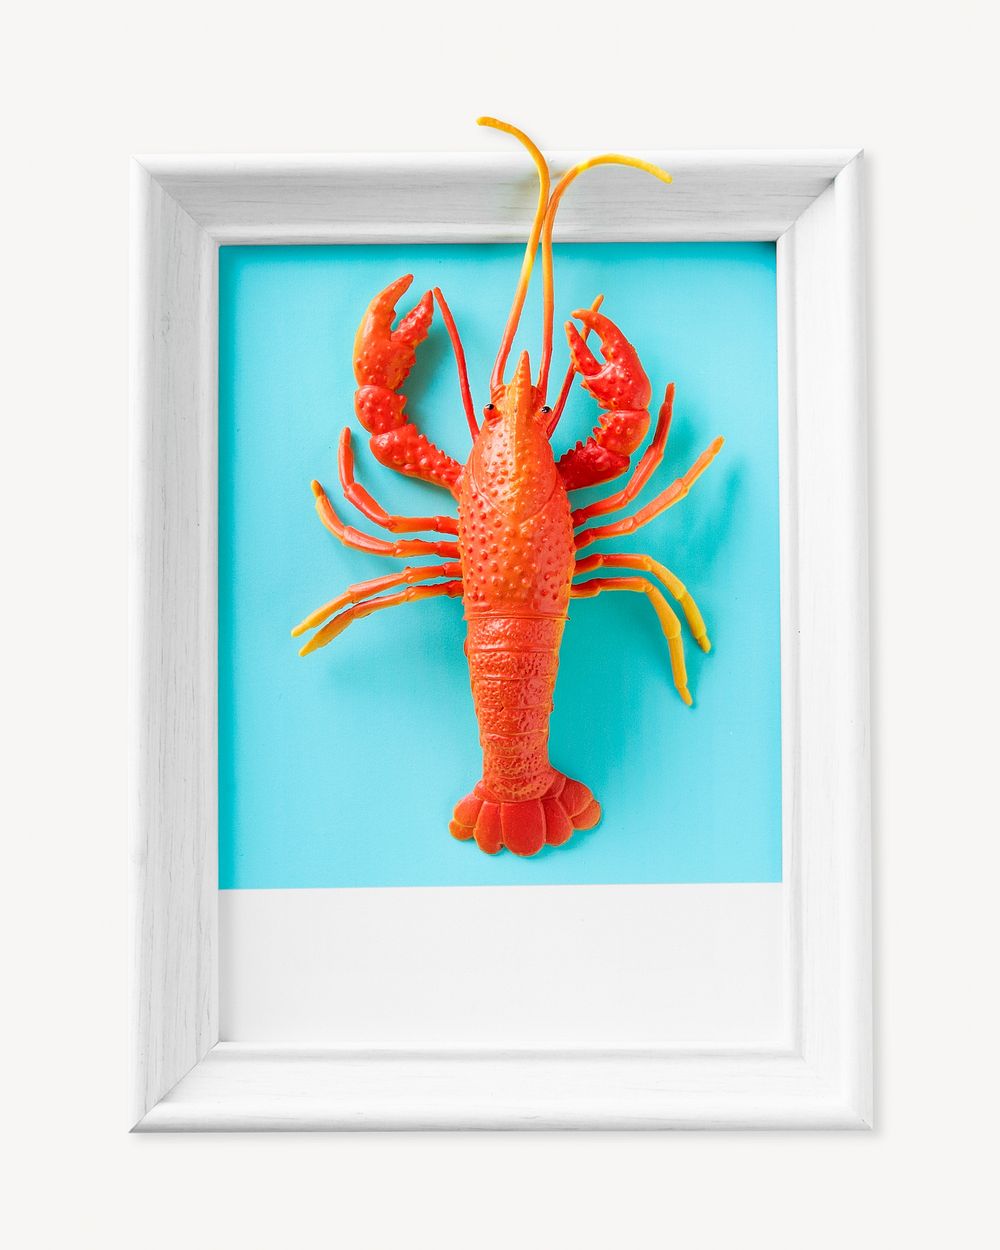 Lobster seafood toy on a frame isolated image